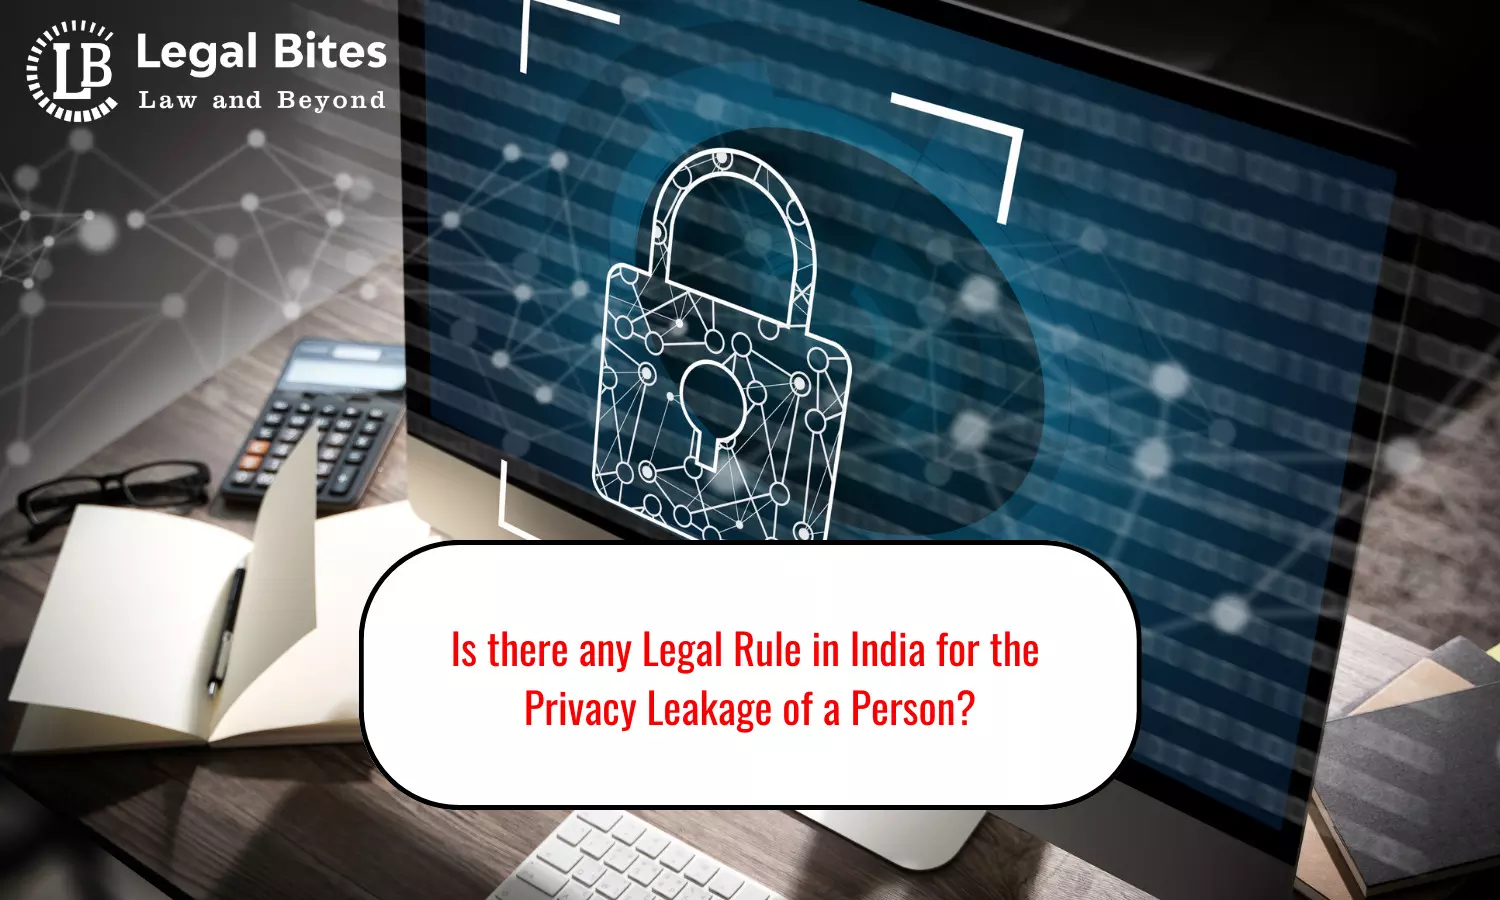 Is there any Legal Rule in India for the Privacy Leakage of a Person?